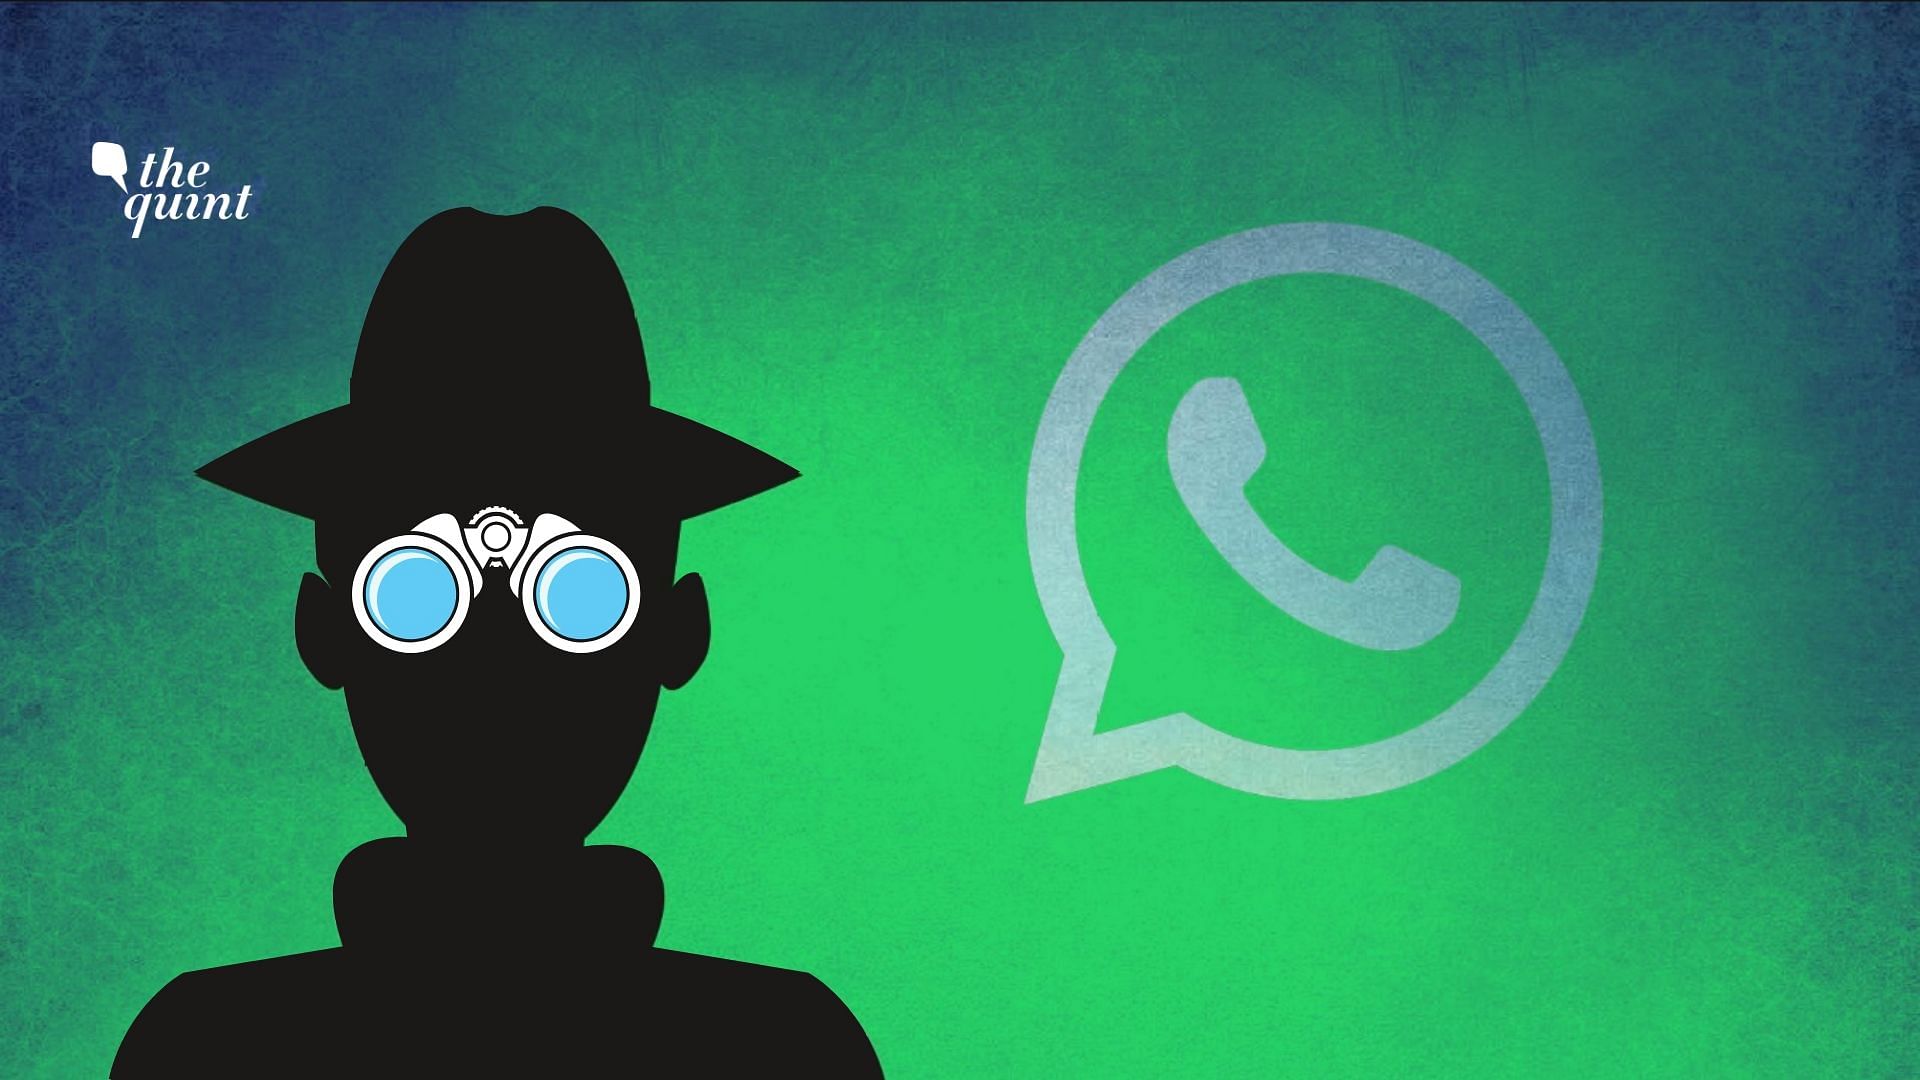  Several activists and journalists came forward to confirm that they were informed of the attack by WhatsApp.